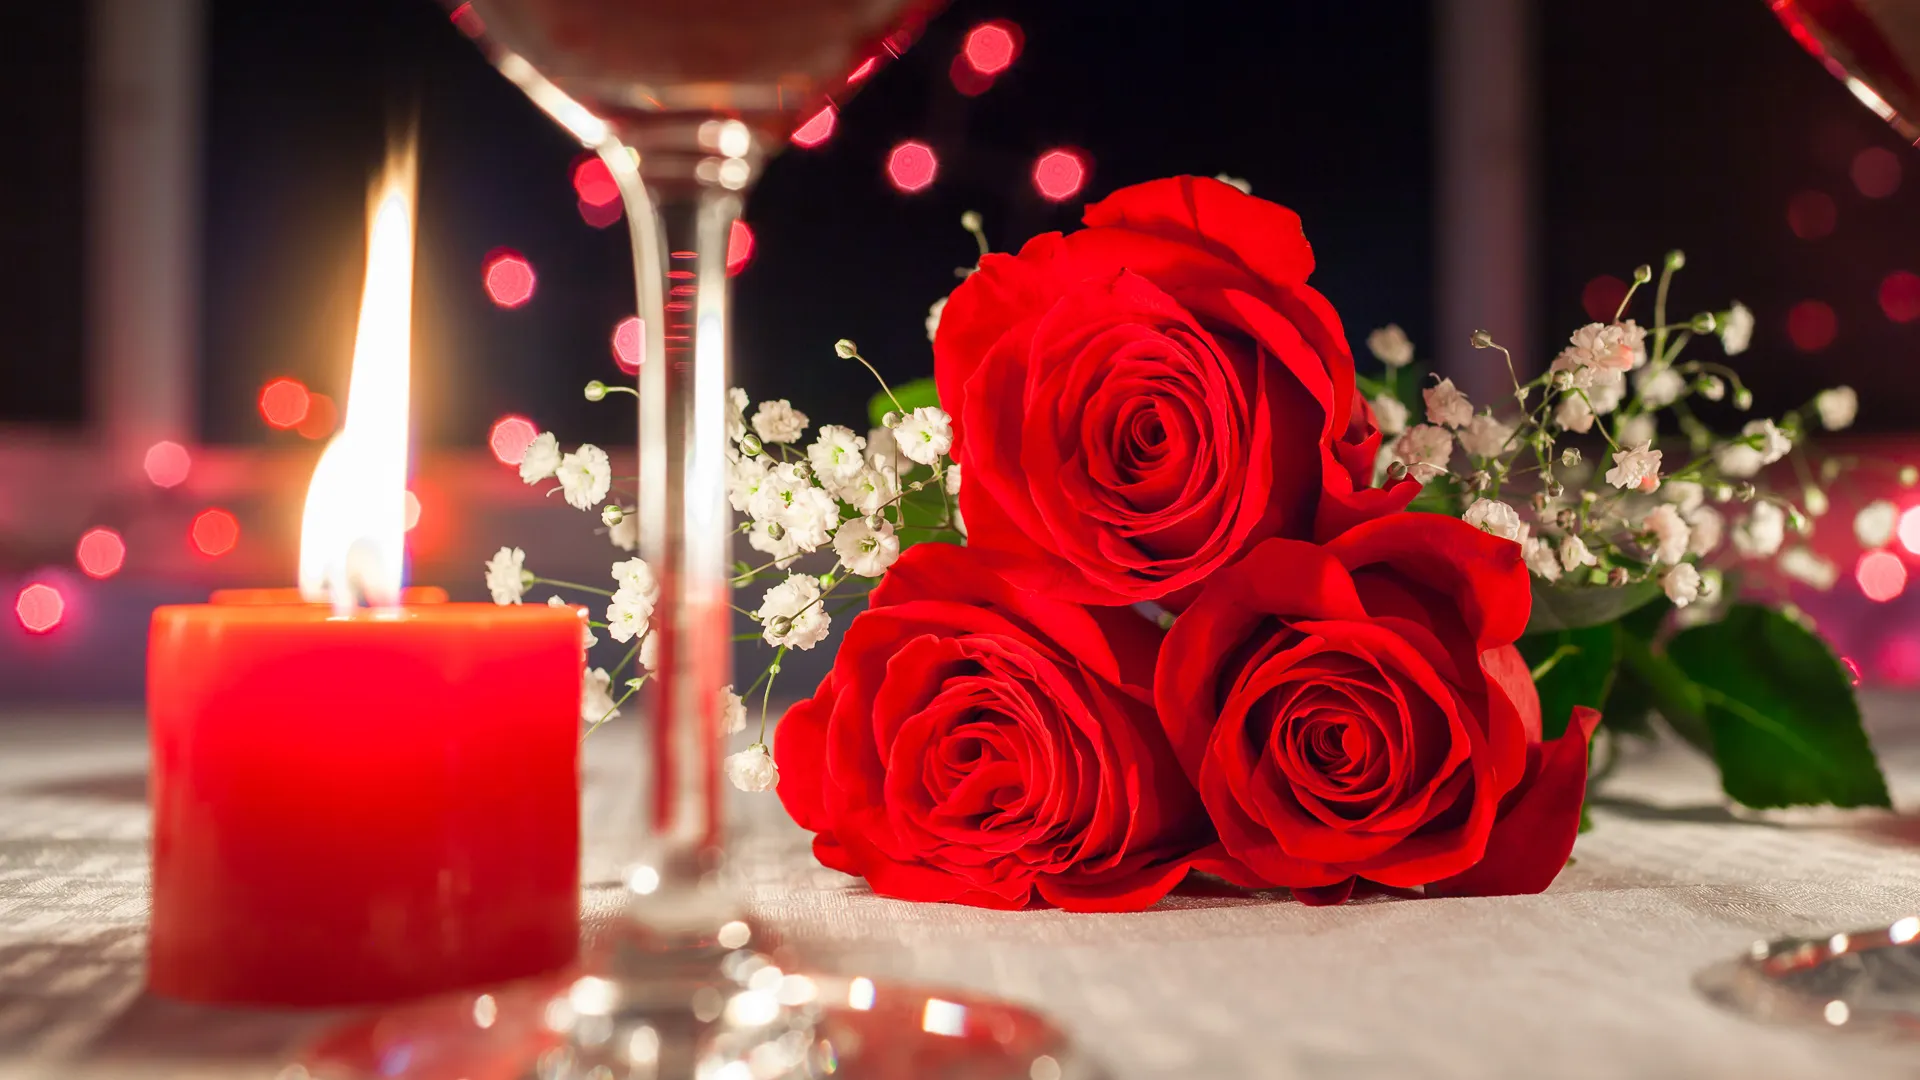 Red roses and candlelight romantic dinner setting.